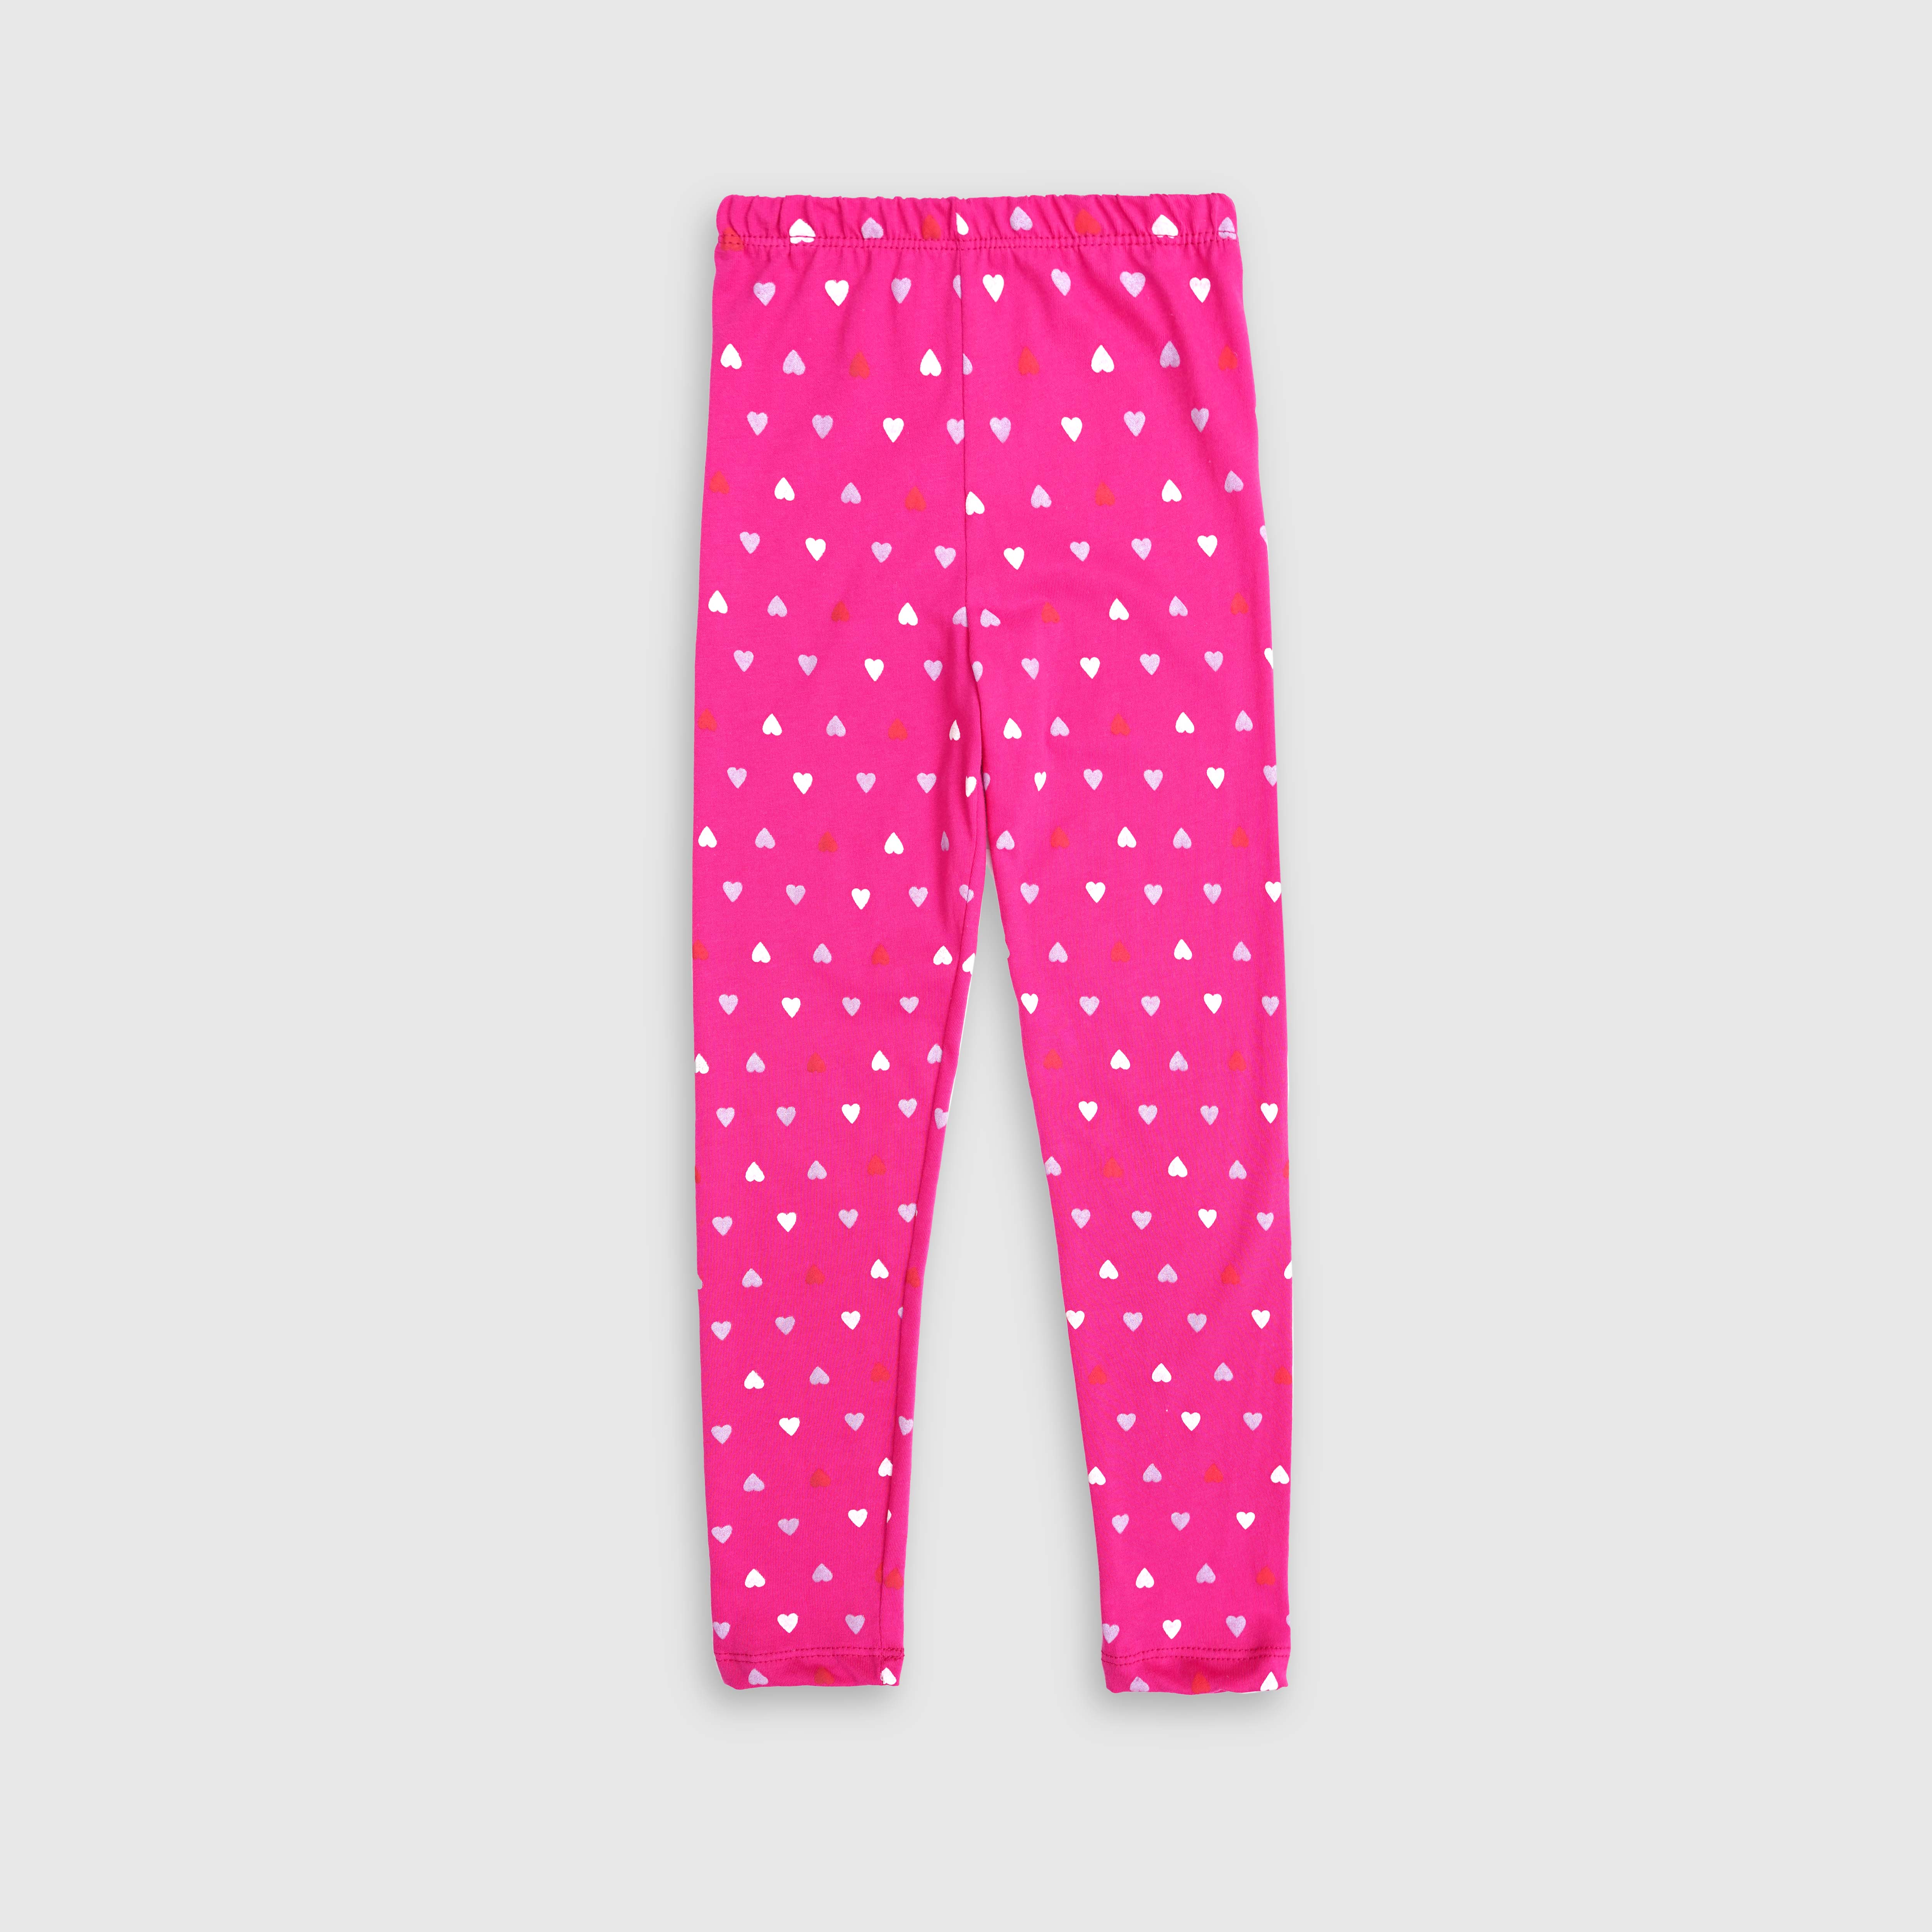 All-Over Heart Printed Cotton Leggings